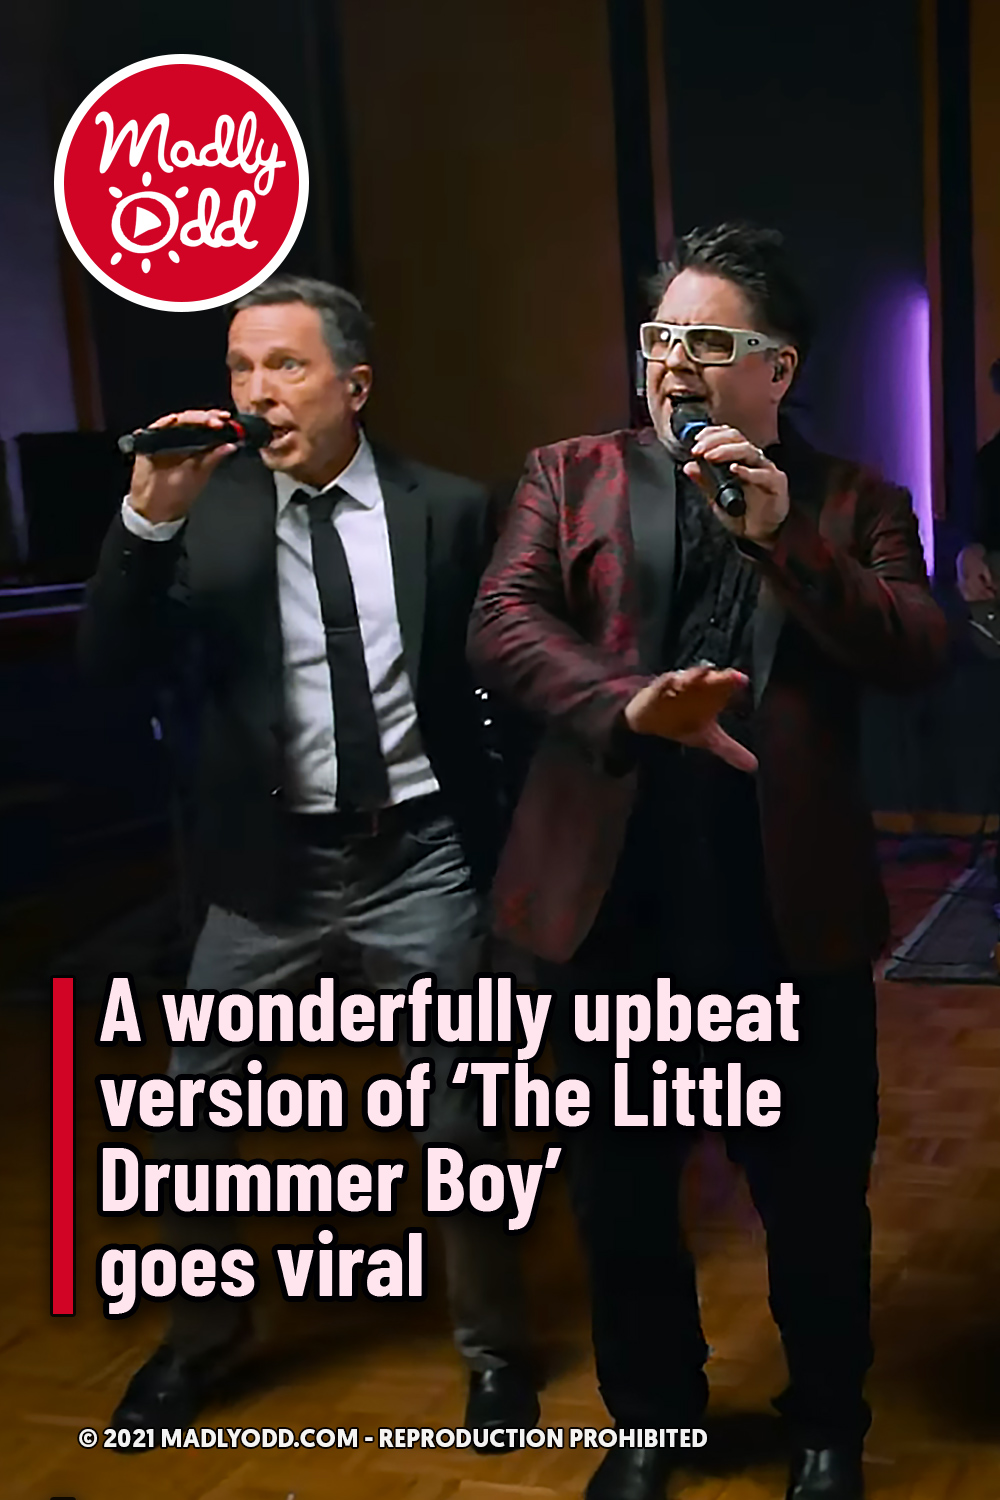 A wonderfully upbeat version of ‘The Little Drummer Boy’ goes viral